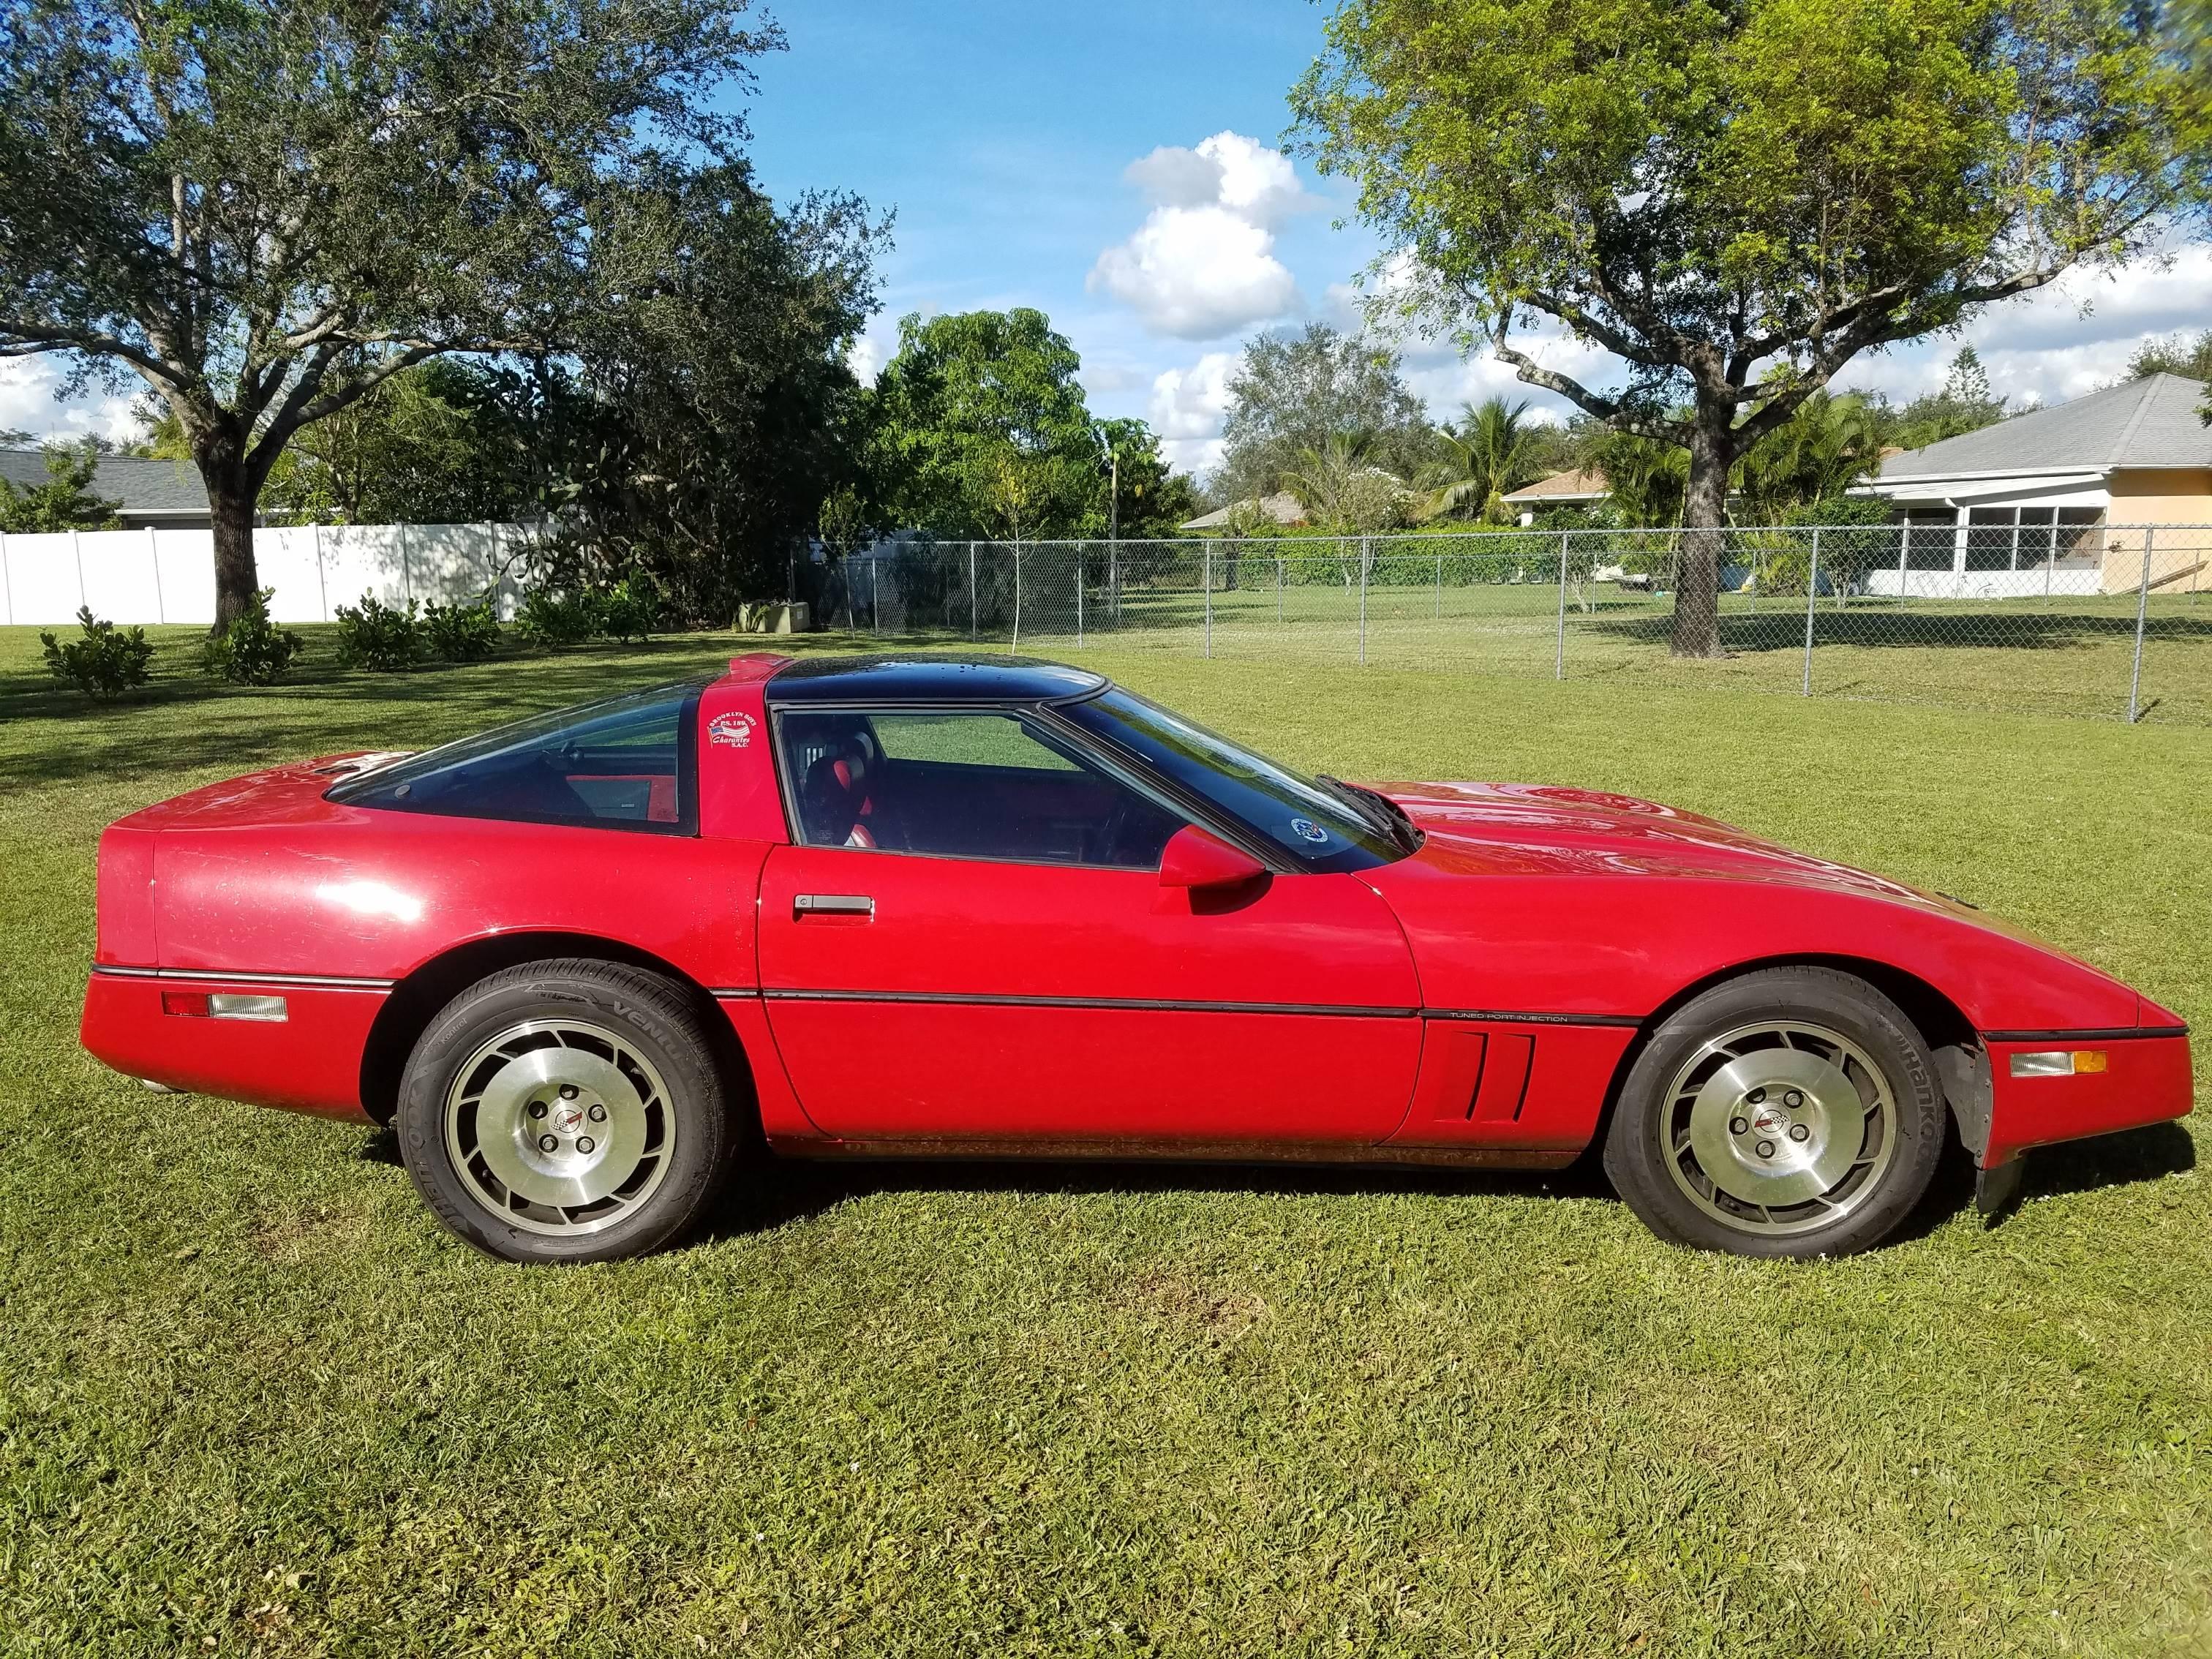 1986 Chevrolet Corvette Coupe. 2nd owner of vehicle.  Approximately 13,000